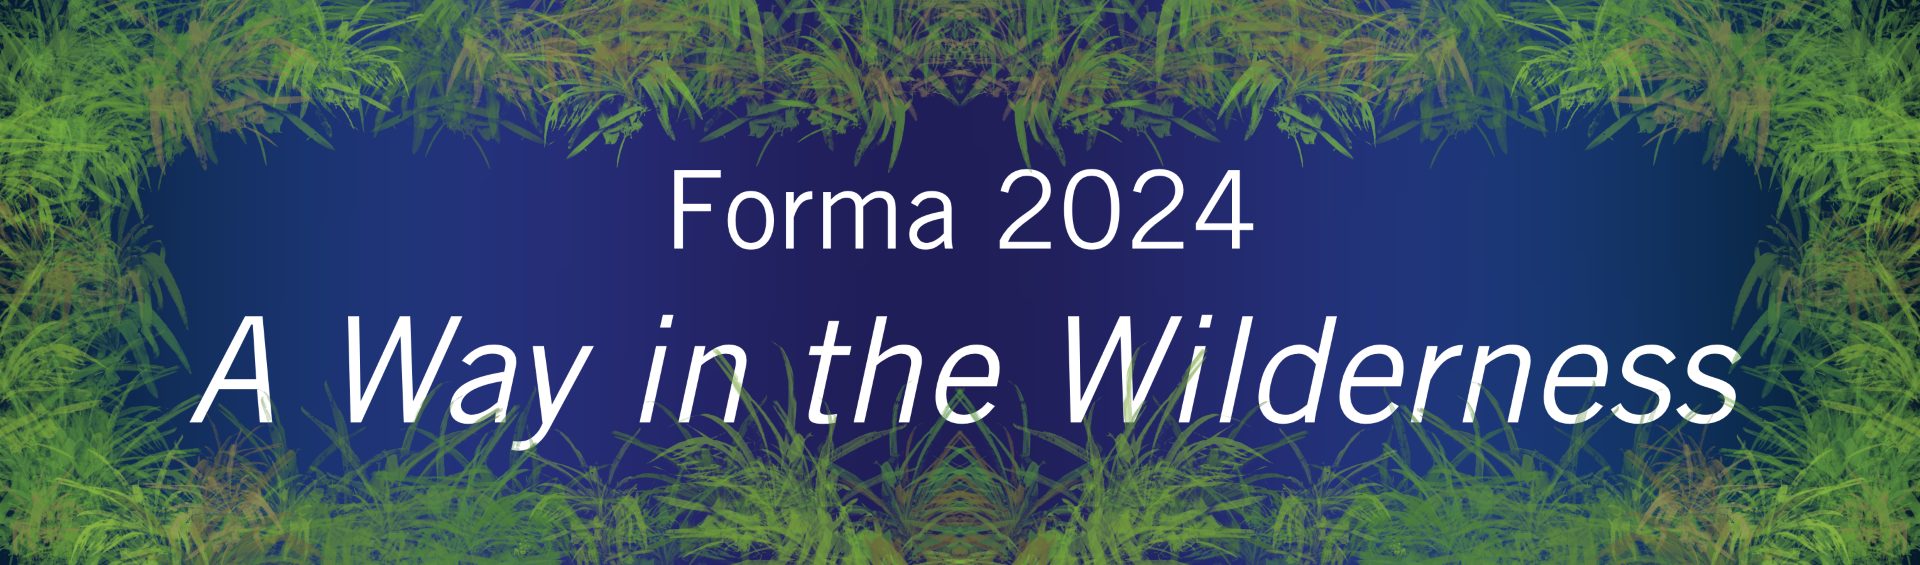 2024-forma-conference-logo_213